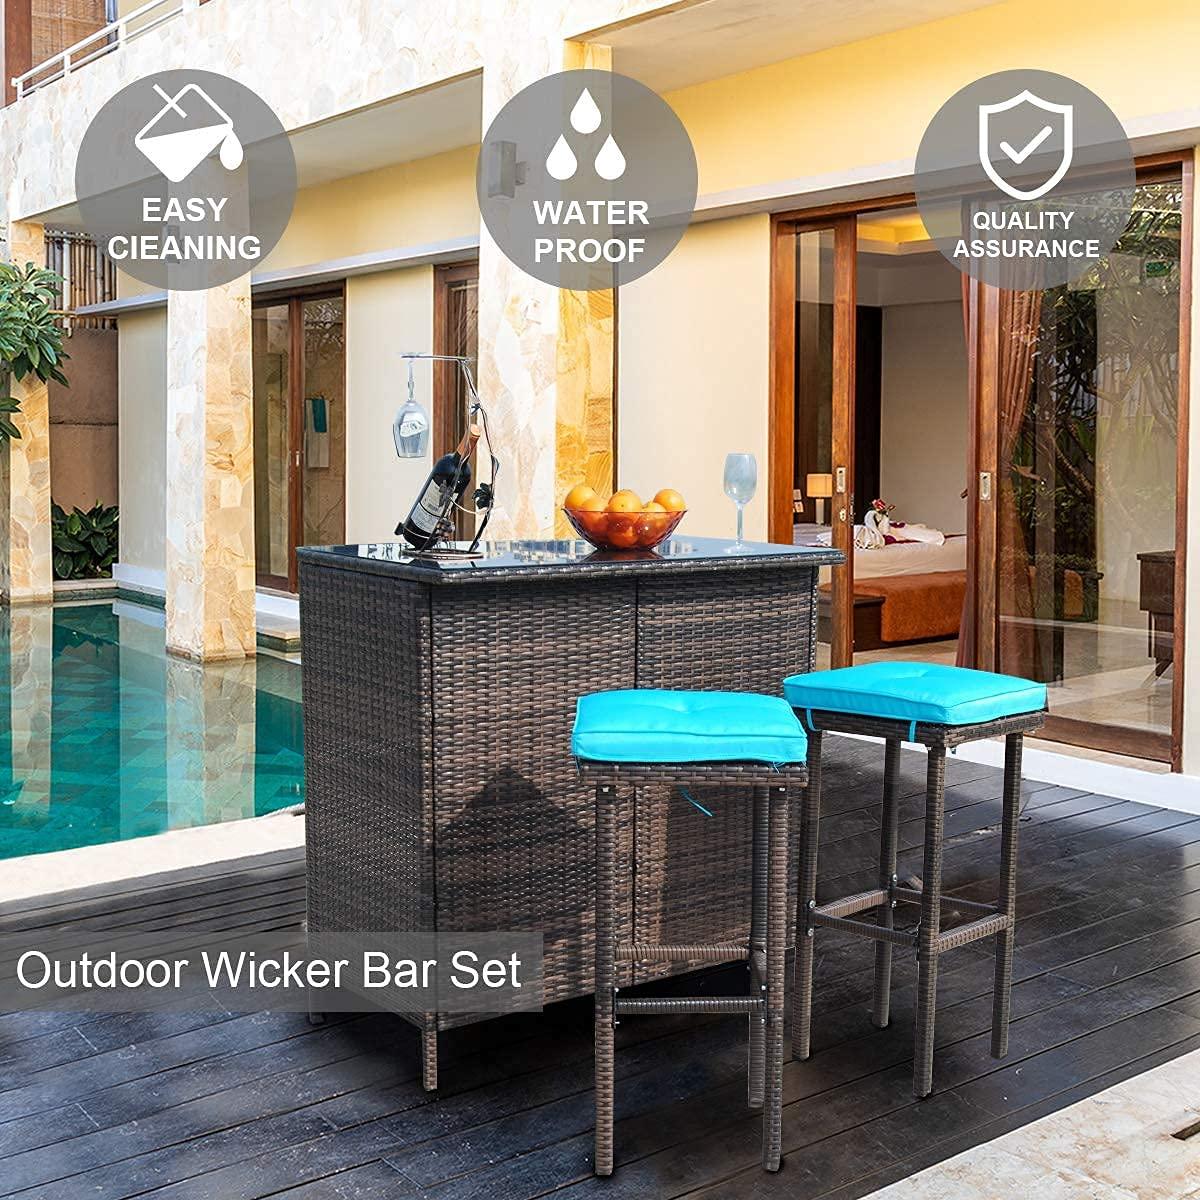 Polar Aurora 3PCS Patio Bar Set with Stools and Glass Top Table Patio Wicker Outdoor Furniture with Blue Removable Cushions for Backyards, Porches, Gardens or Poolside - CookCave